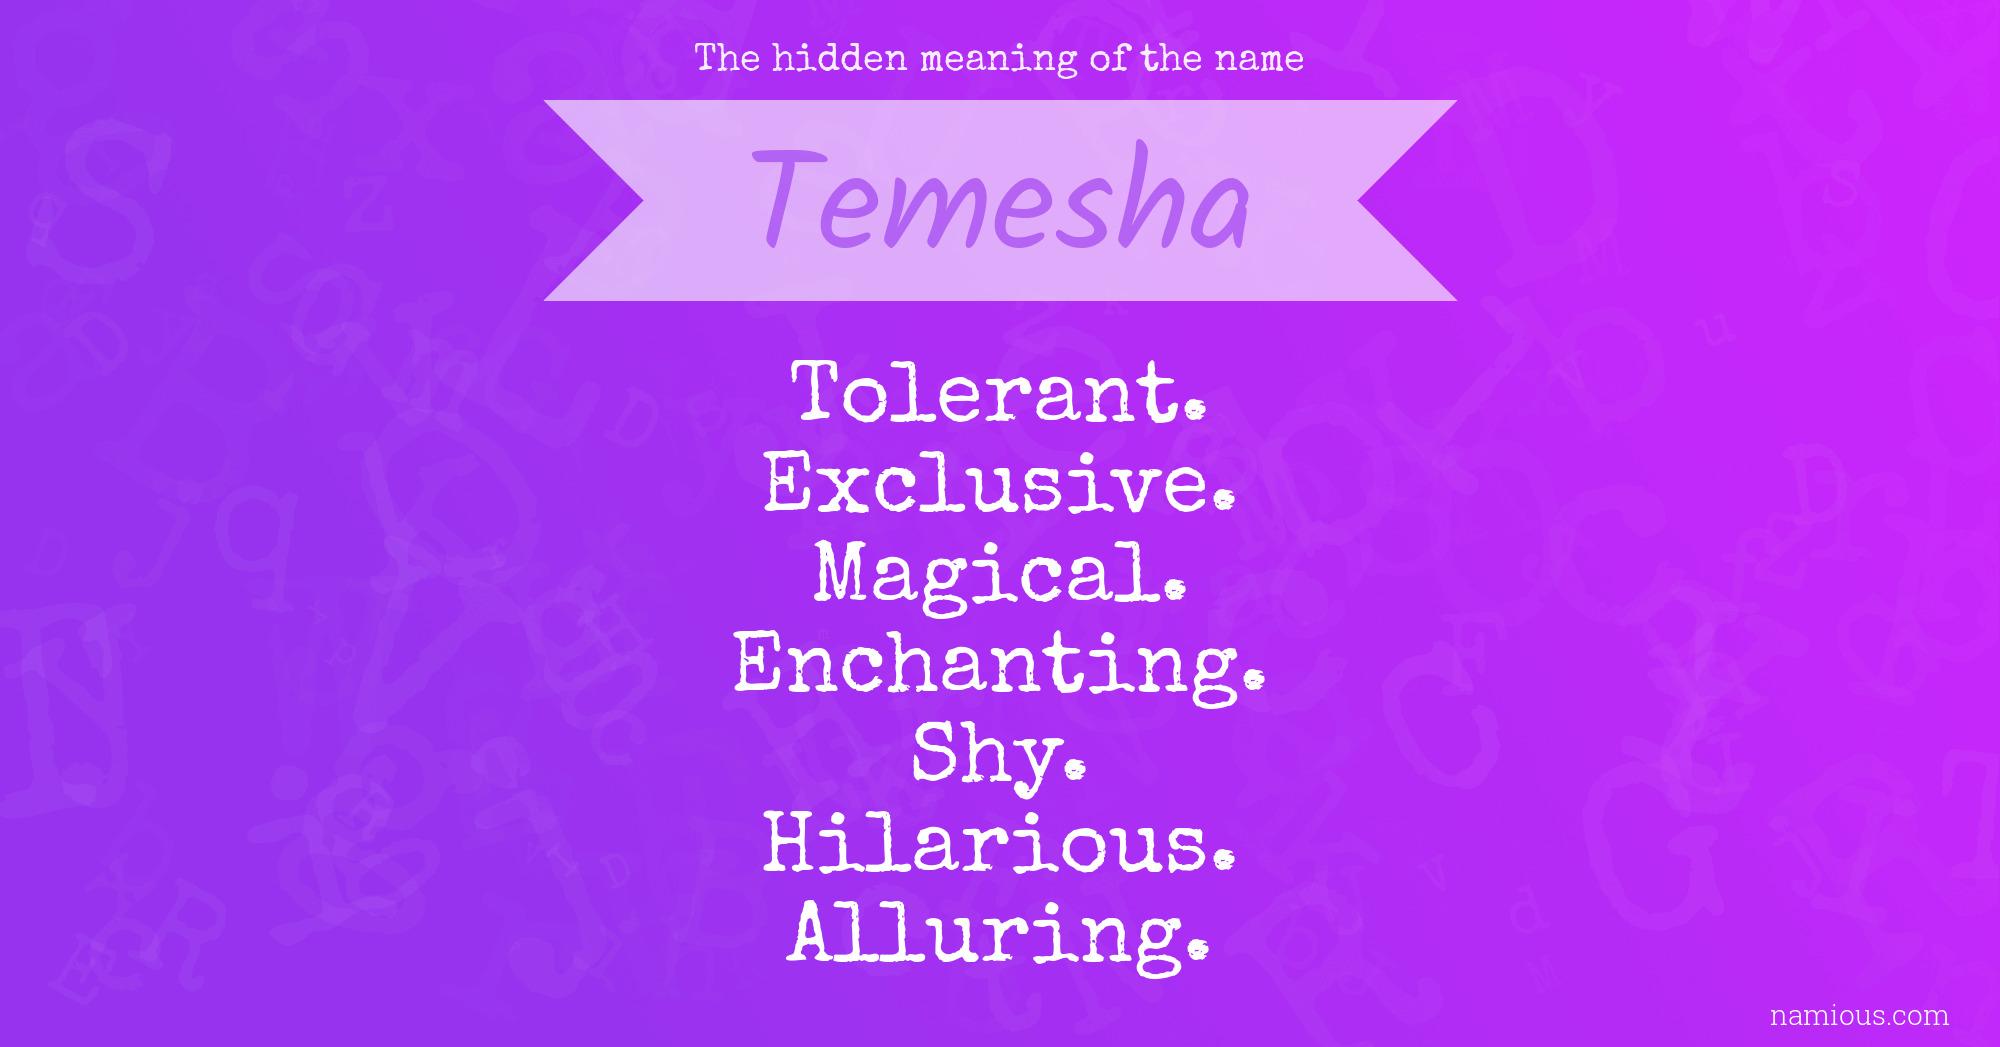 The hidden meaning of the name Temesha